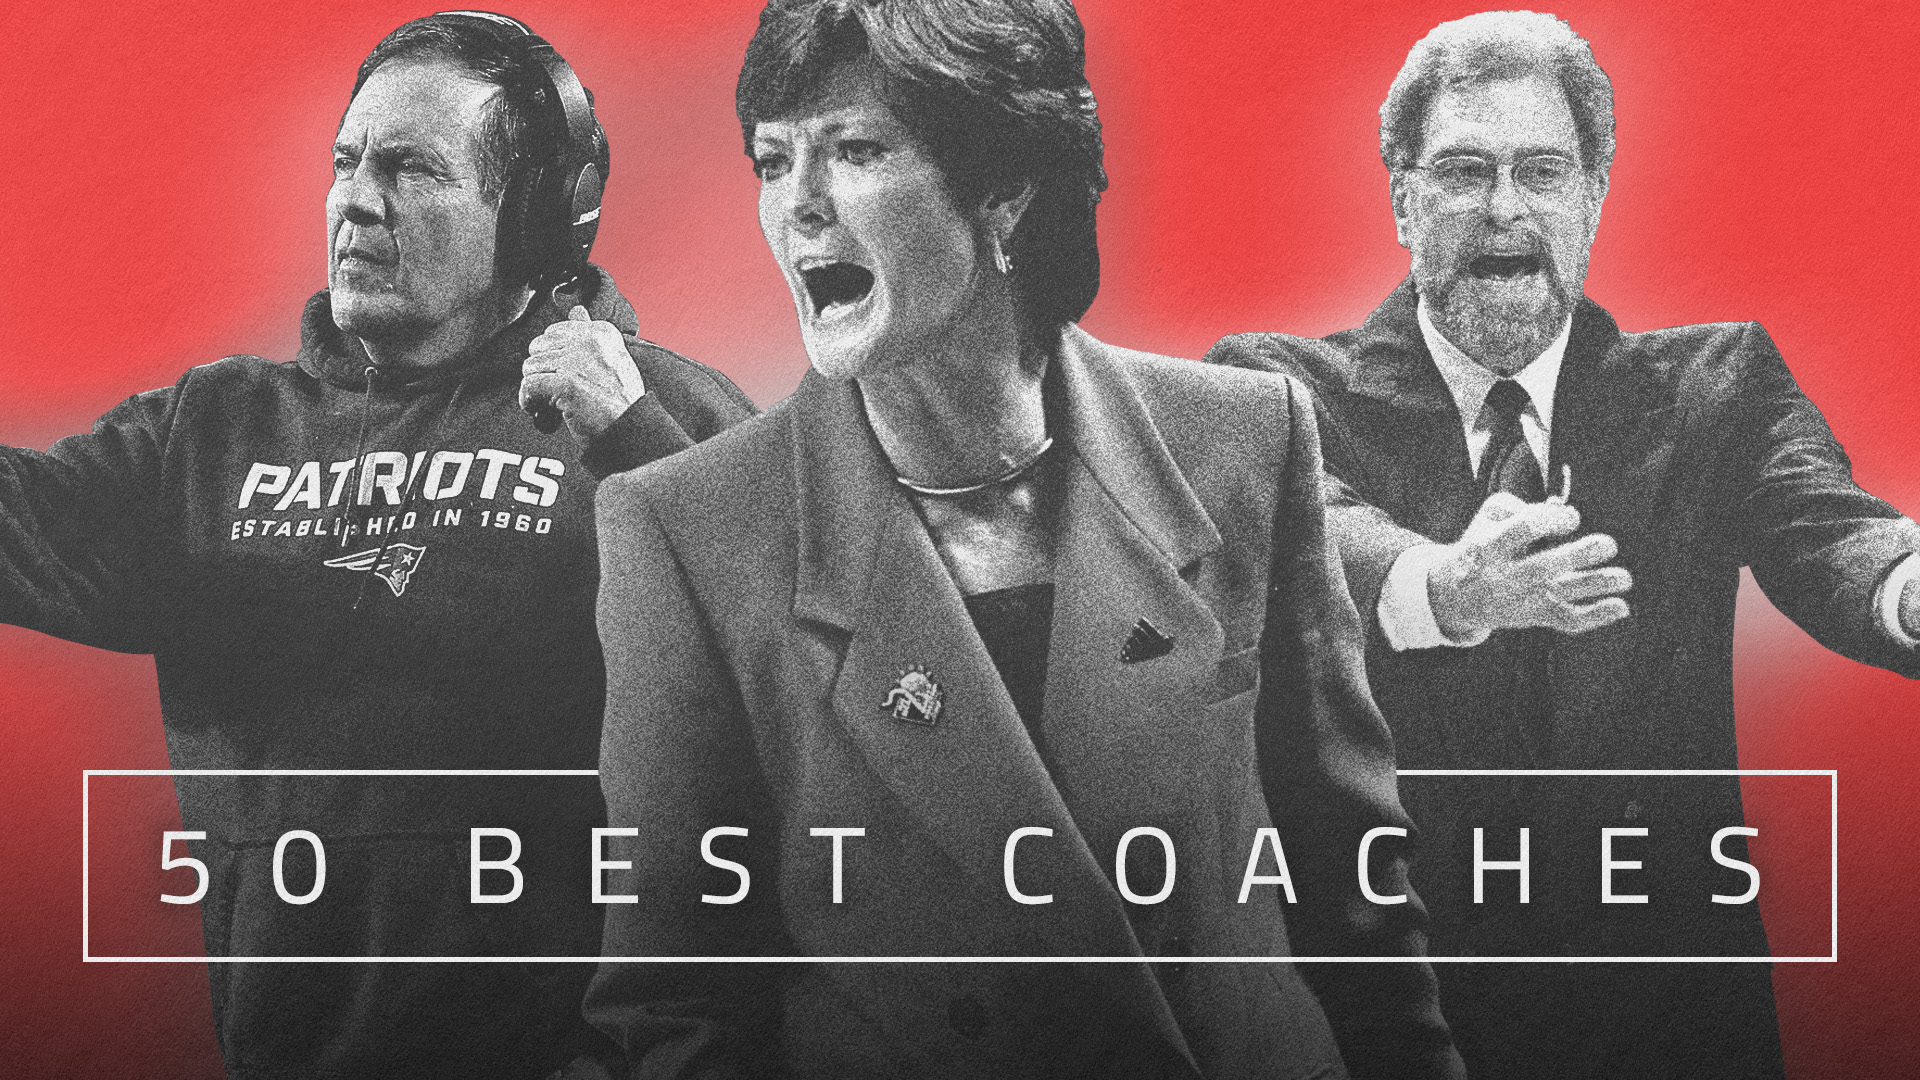 Sporting News ranks the 50 greatest coaches of all time Sporting News